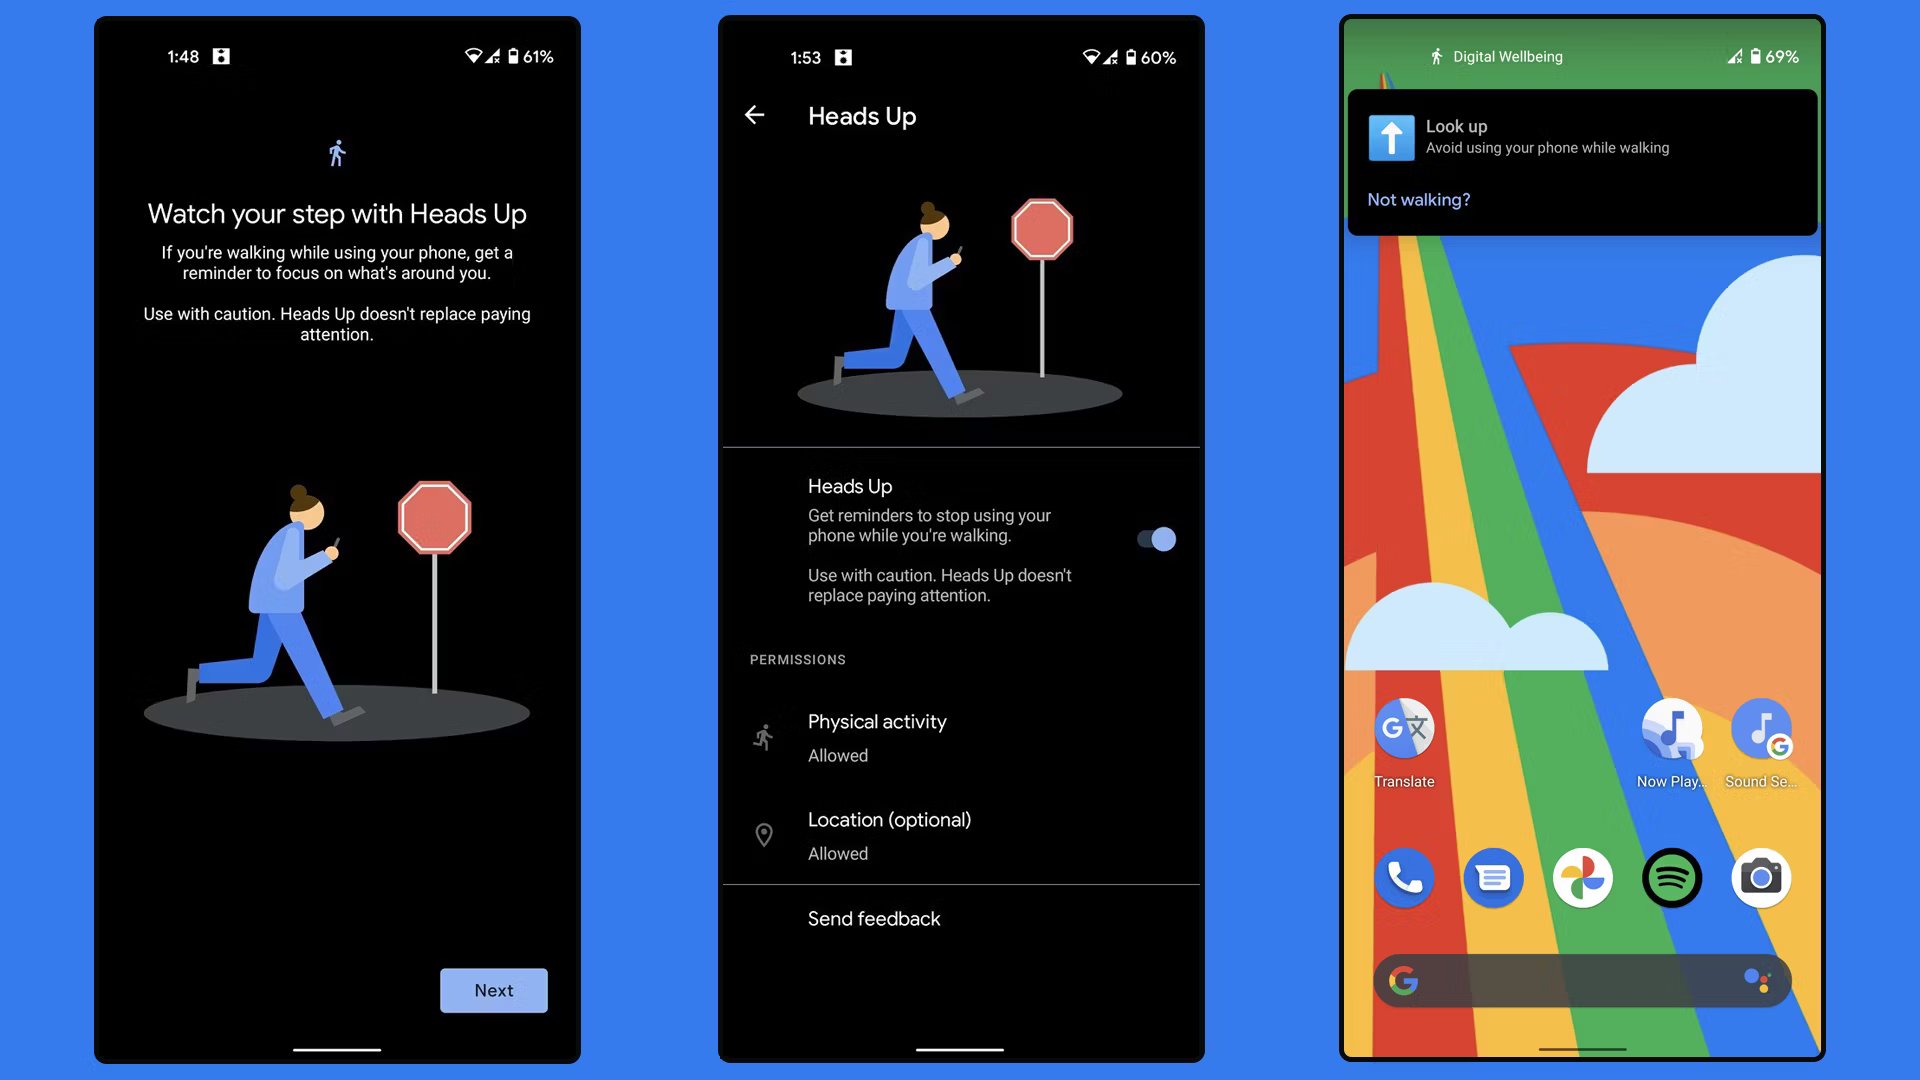 google-wants-users-to-look-up-while-walking-with-heads-up-mode-in-digital-wellbeing